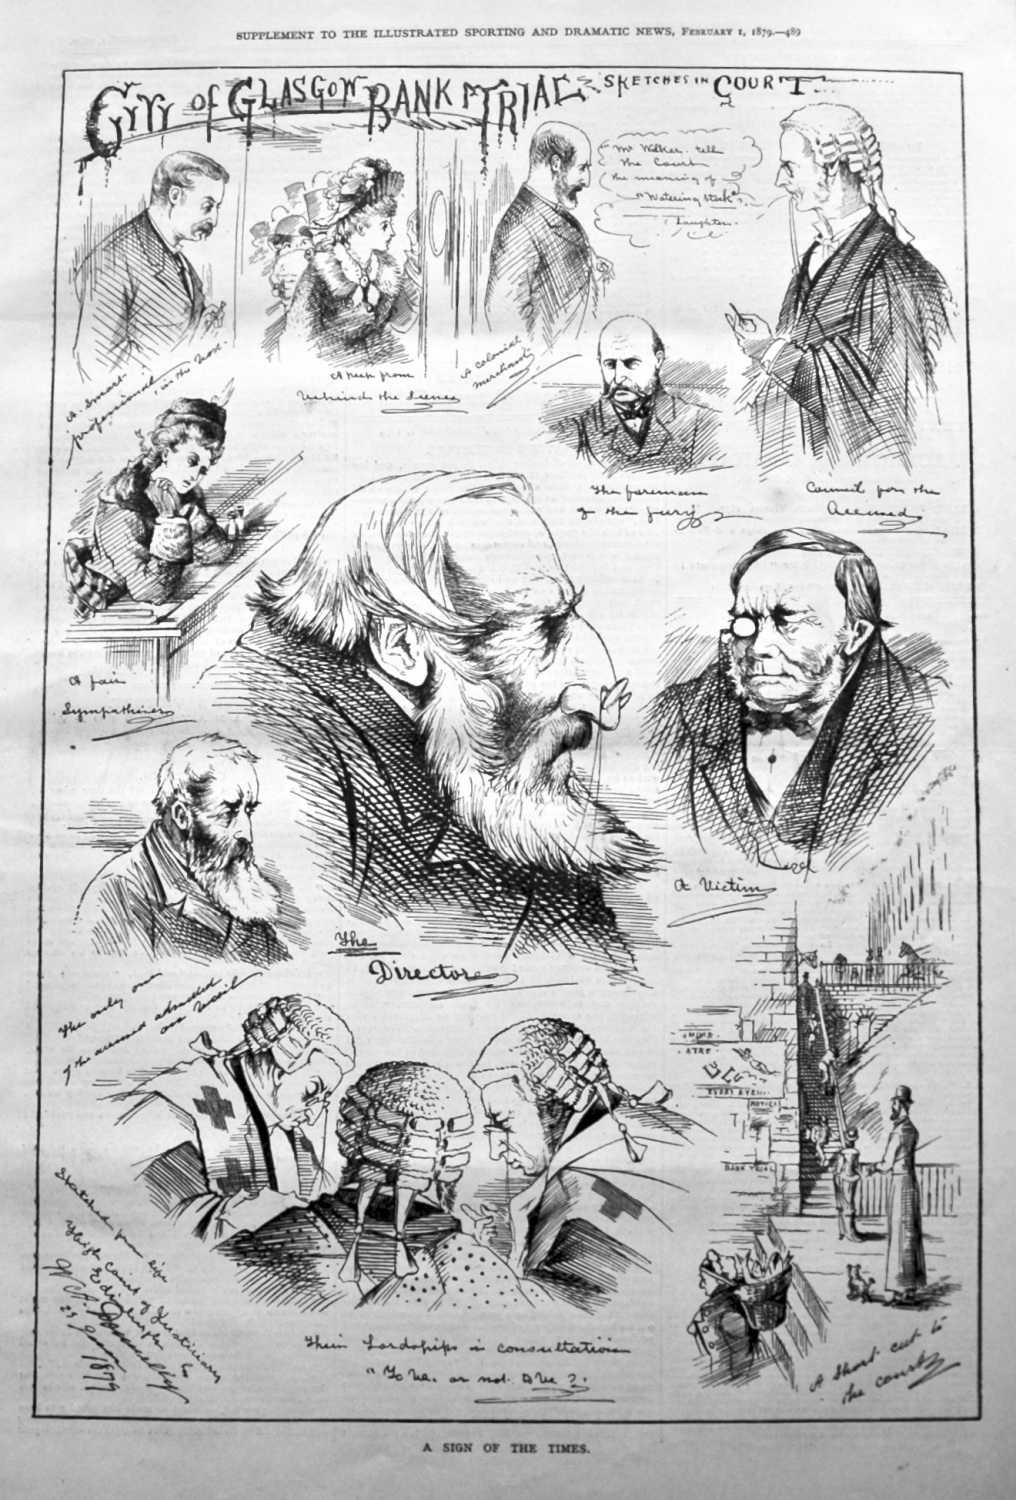 City of Glasgow Bank Trial : Sketches in Court. 1879.